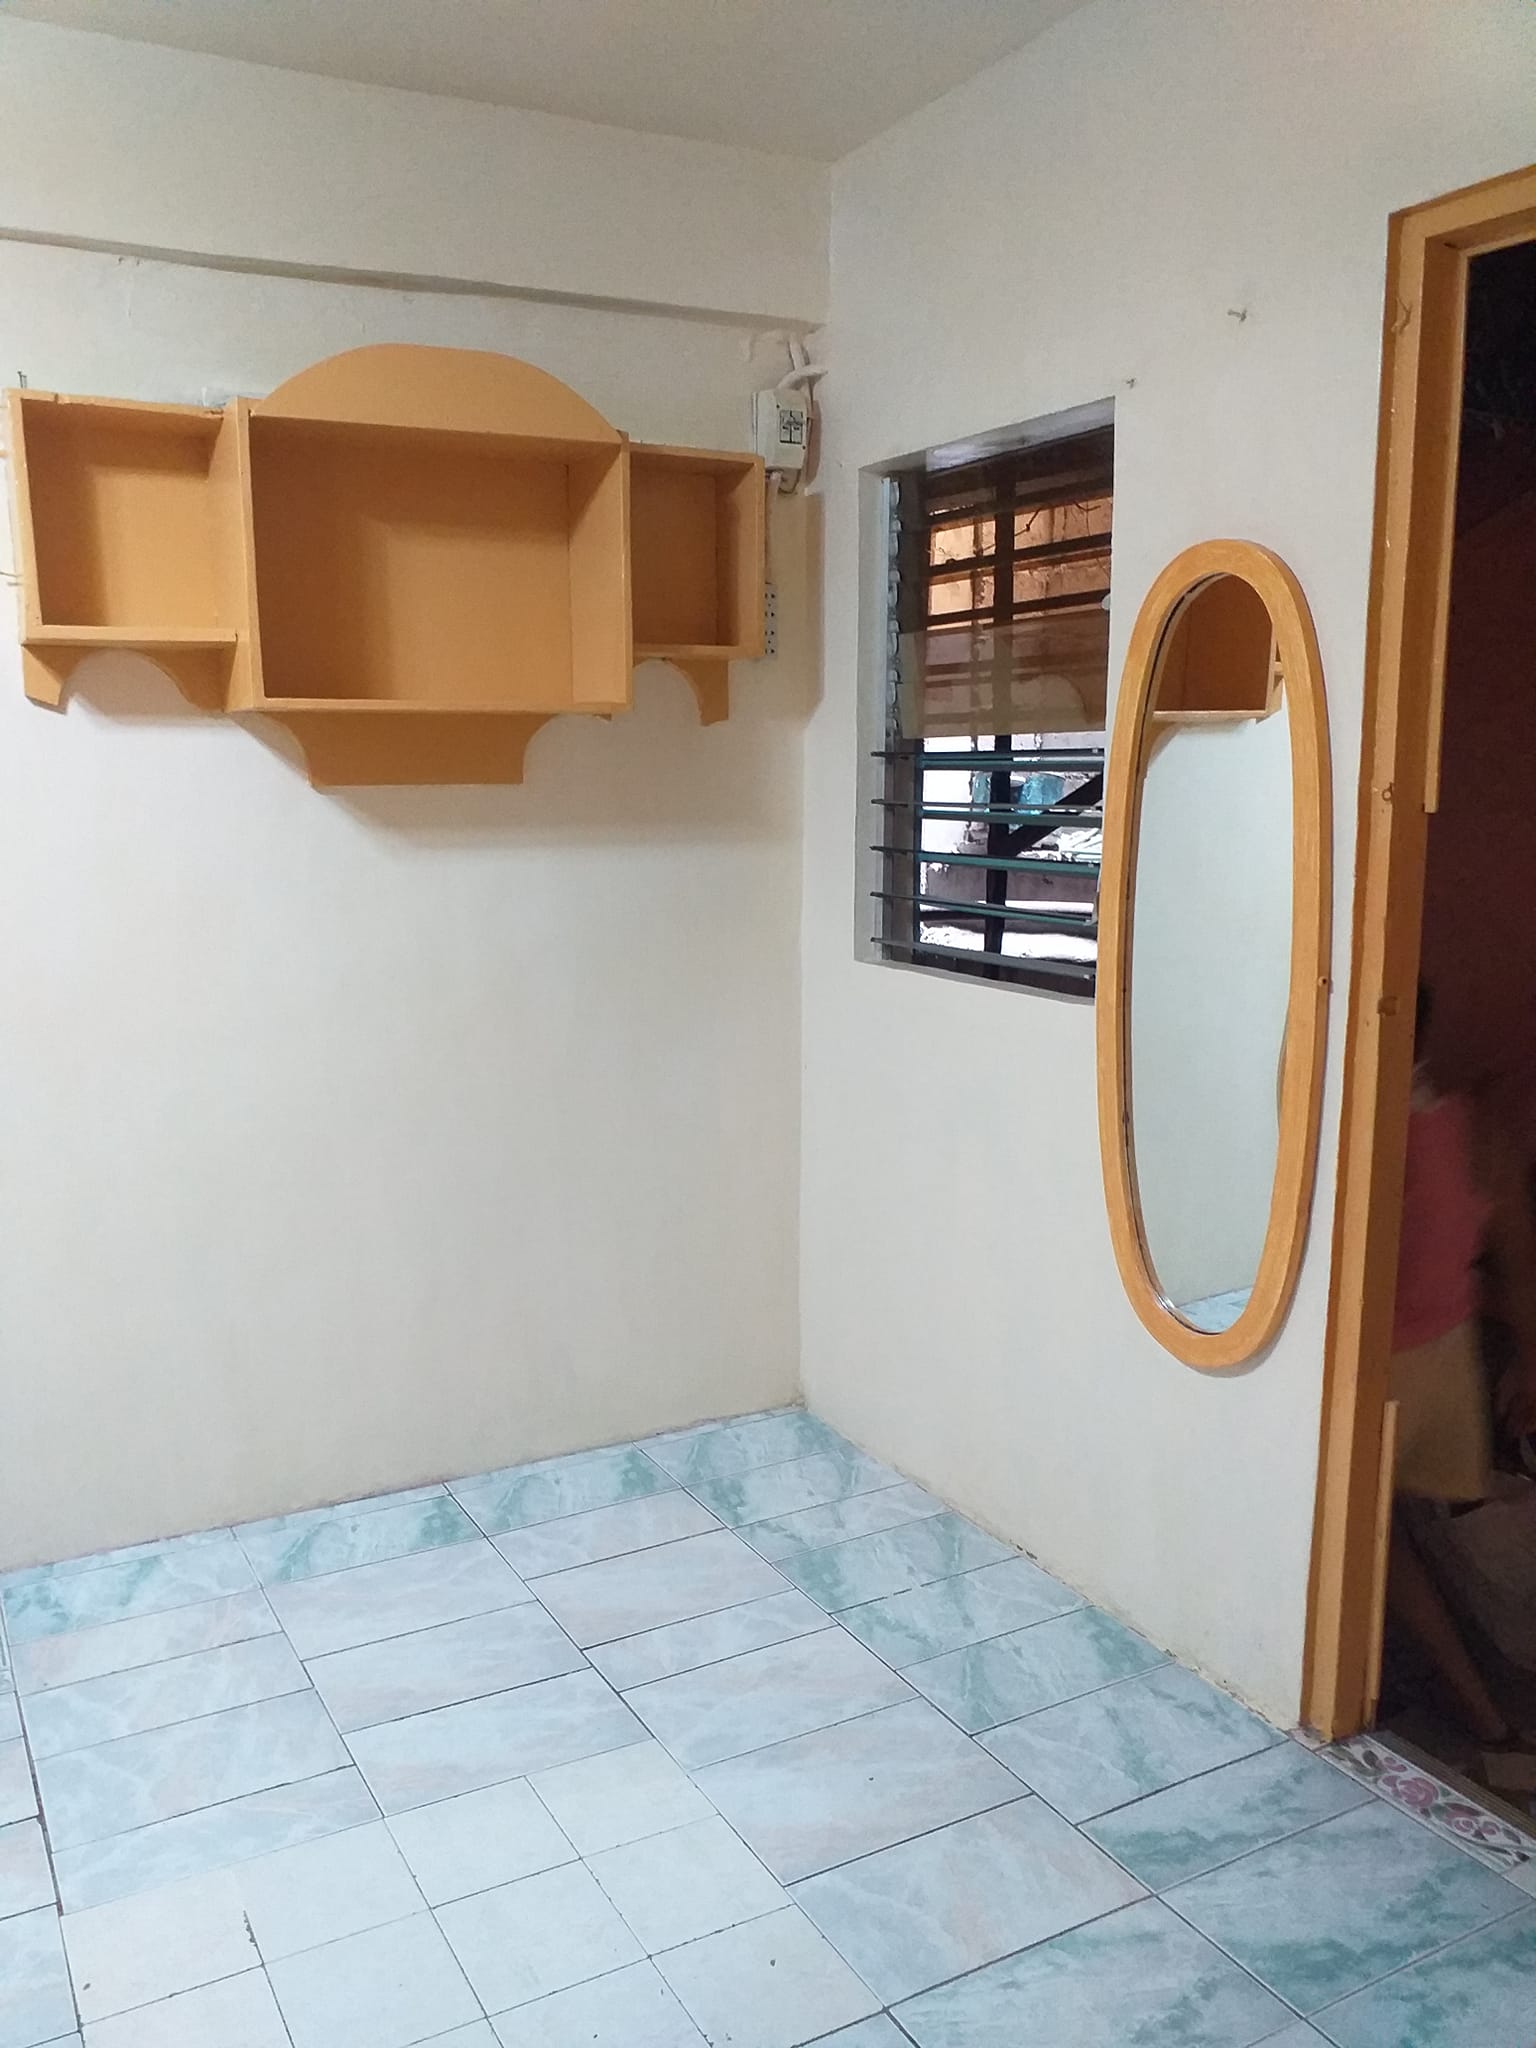 House for rent in qc 5k